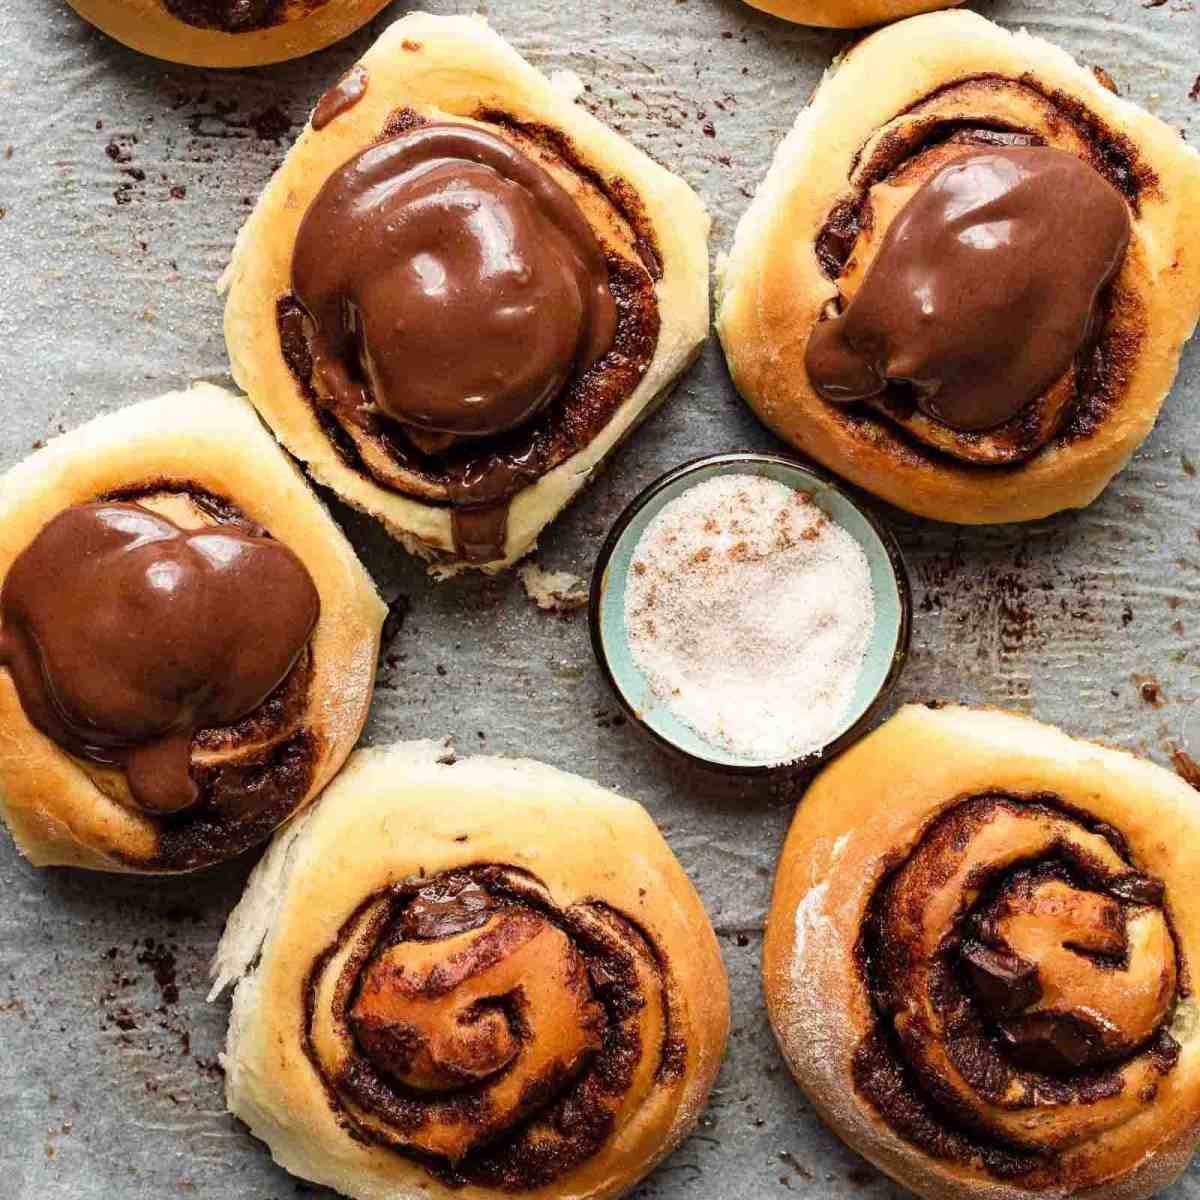 several chocolate rolls on baking pan ready to eat